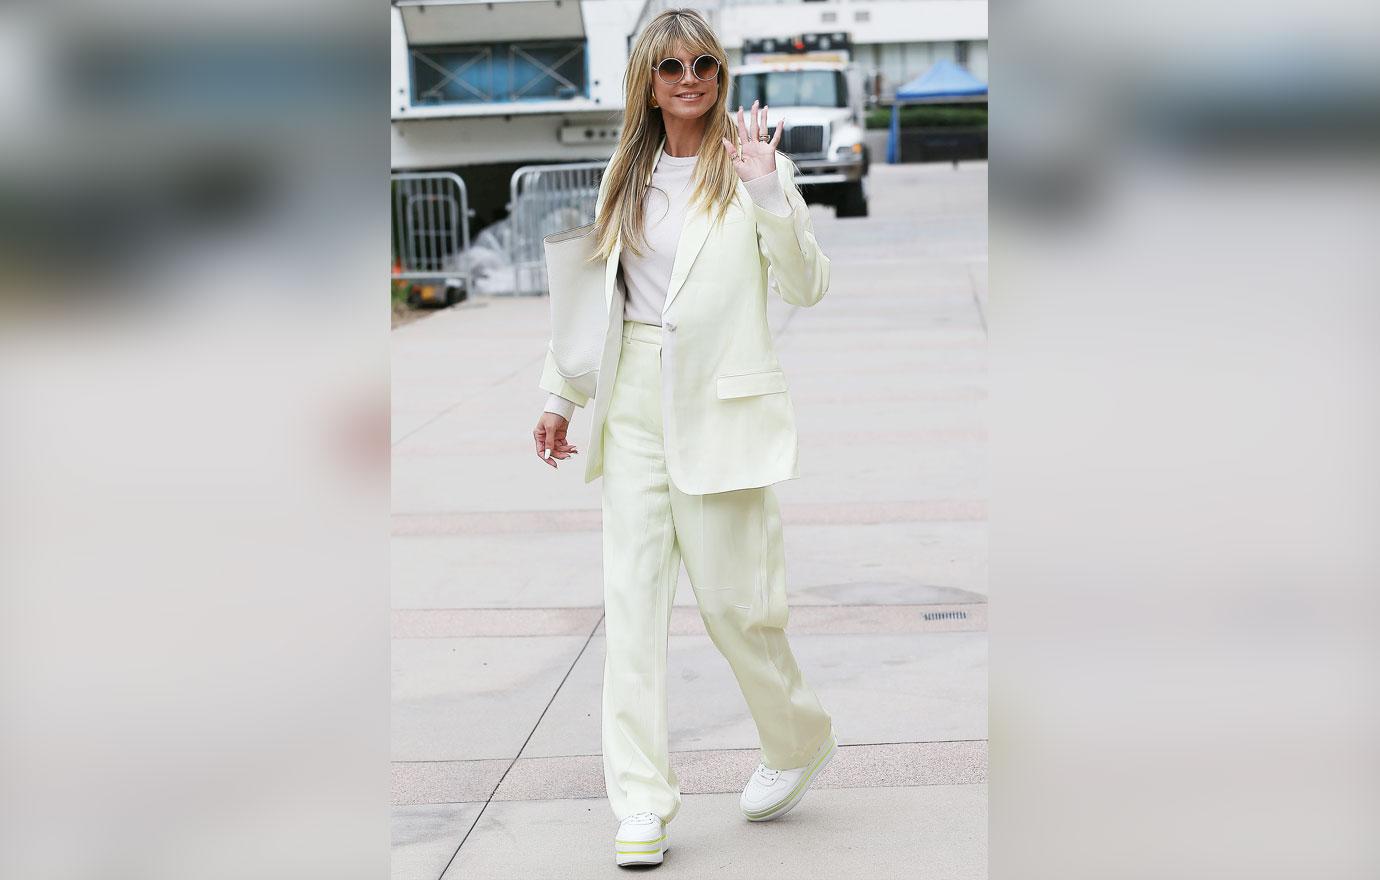 Sofia Vergara steps out in casual chic outfit while reportedly 'poised to  fill' open AGT hosting gig